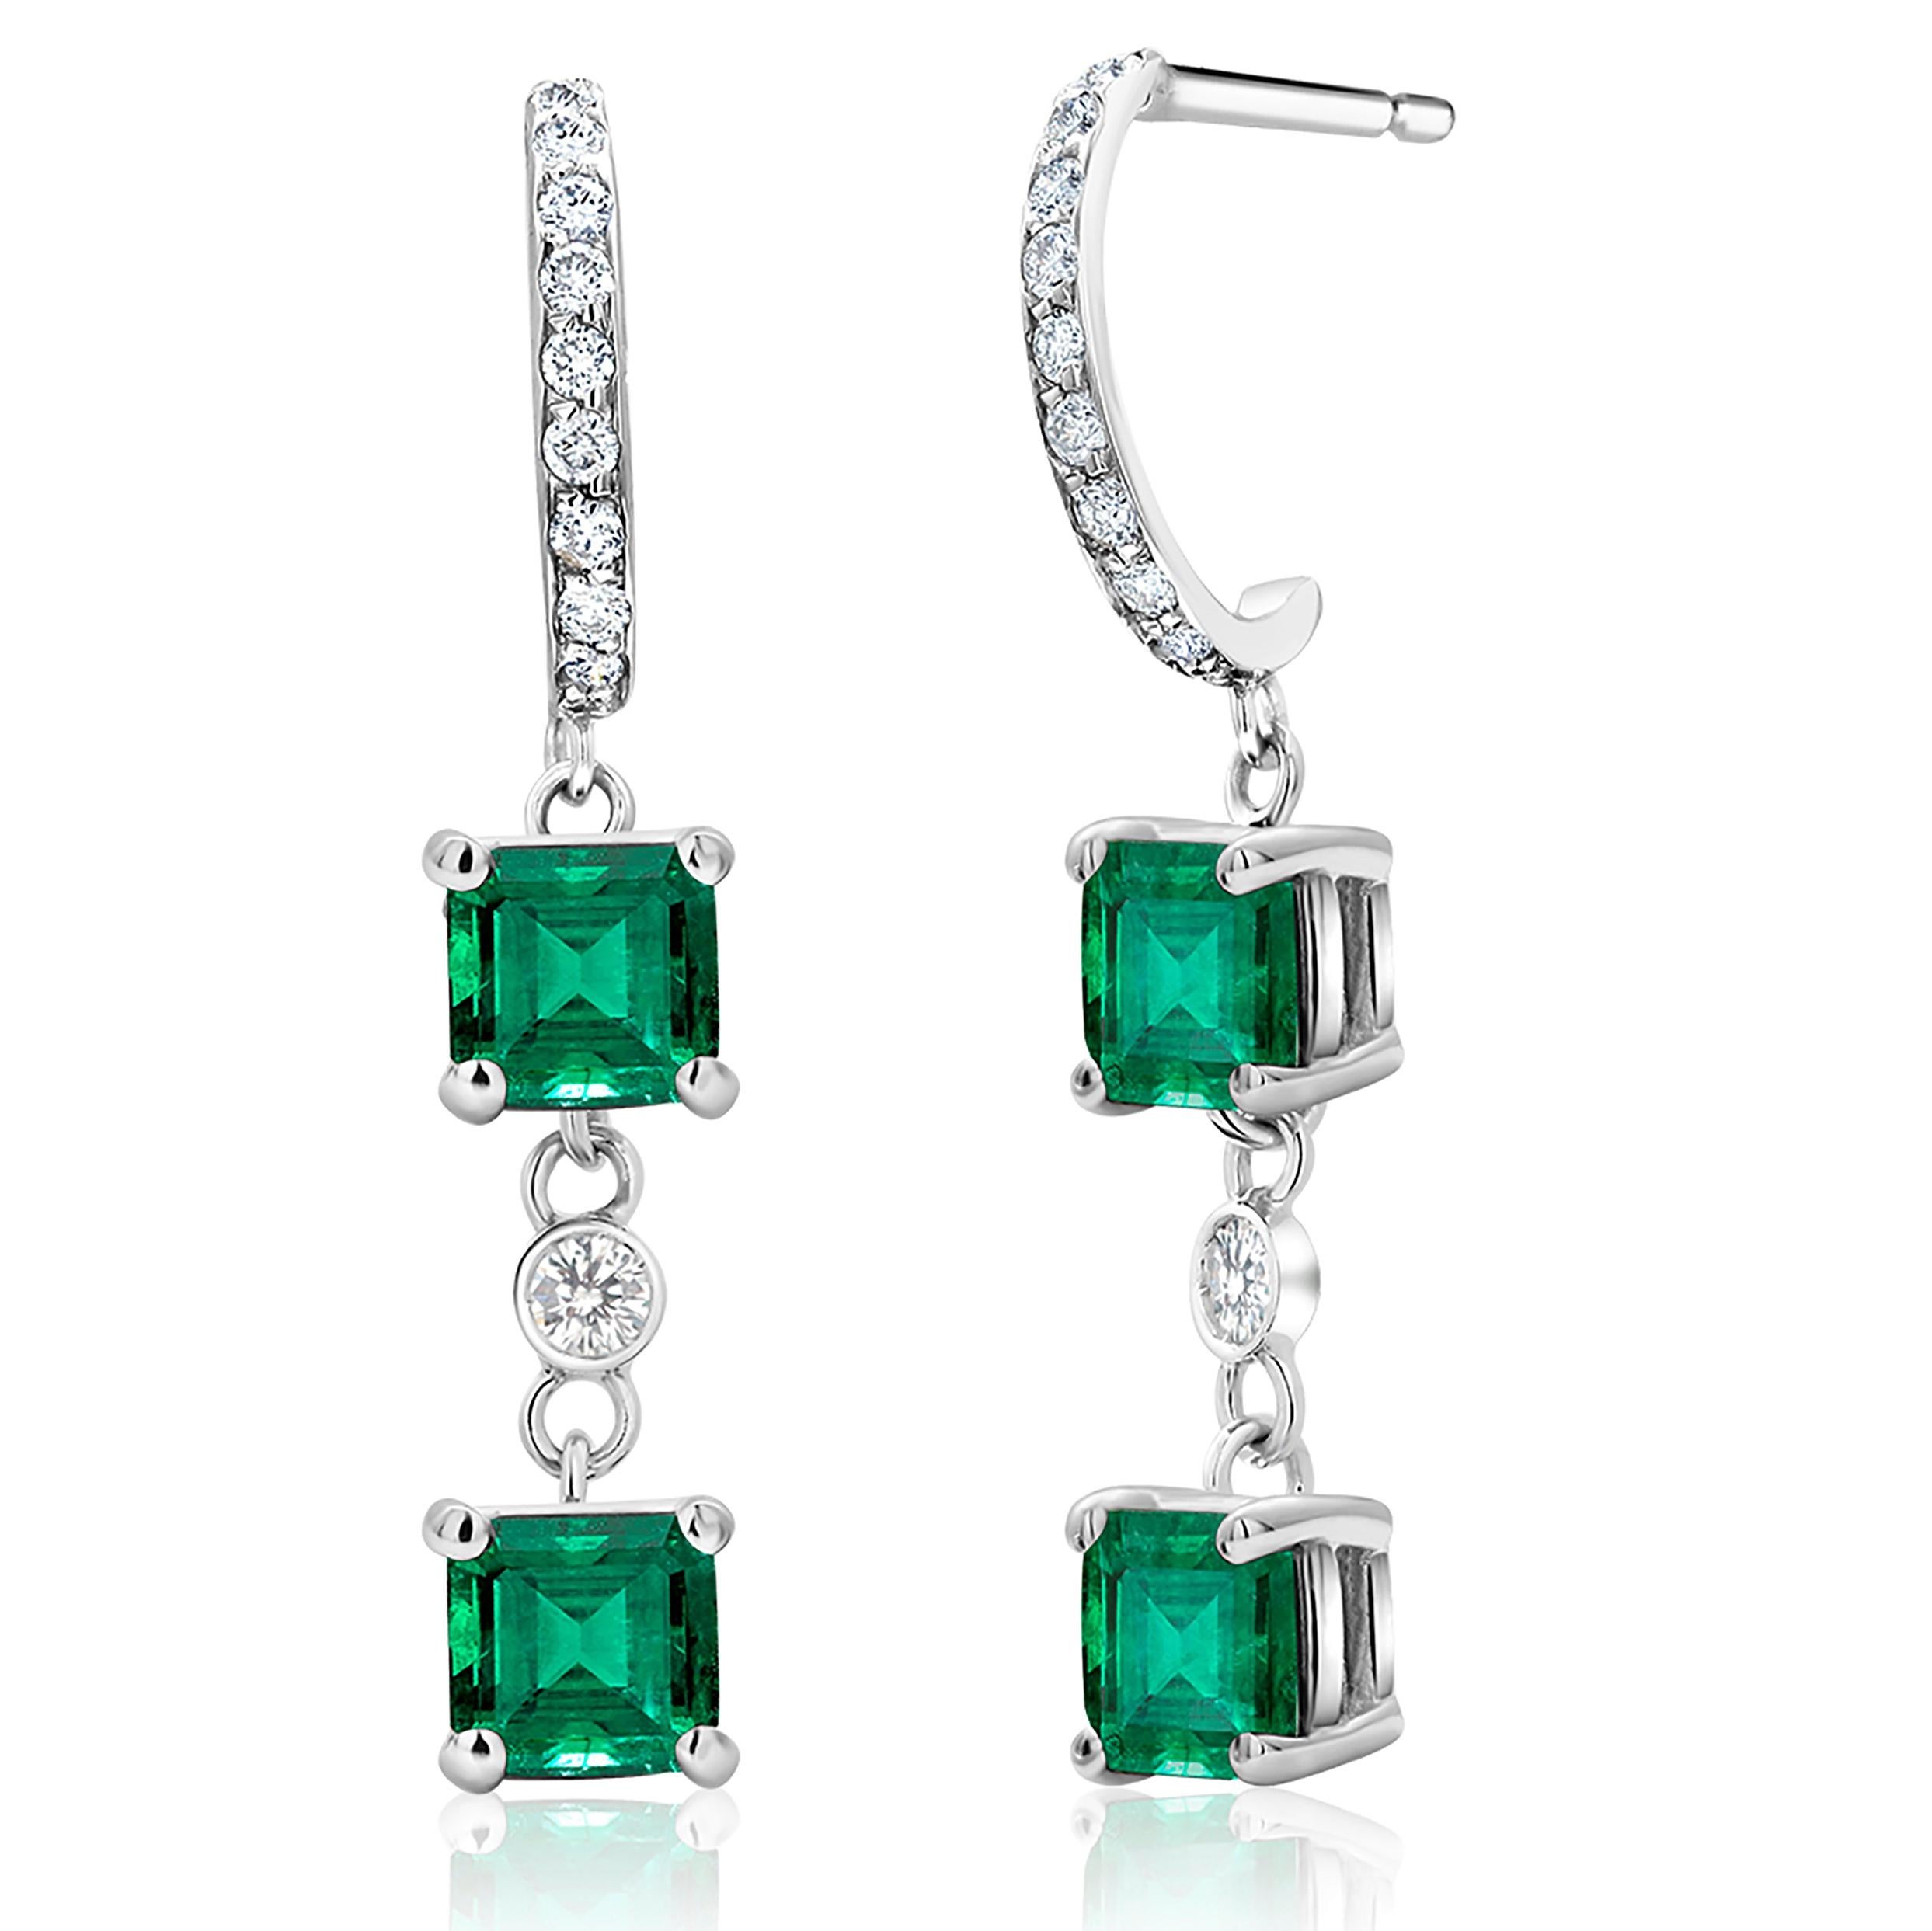 Fourteen karats white gold diamond and emerald drop hoop earrings 
Four Colombian emerald-cut emeralds weighing 2.80 carat
Emeralds measuring 6 millimeters
Diamonds weighing 0.40 carat 
Emeralds quality is bright and vivid green and tone color is